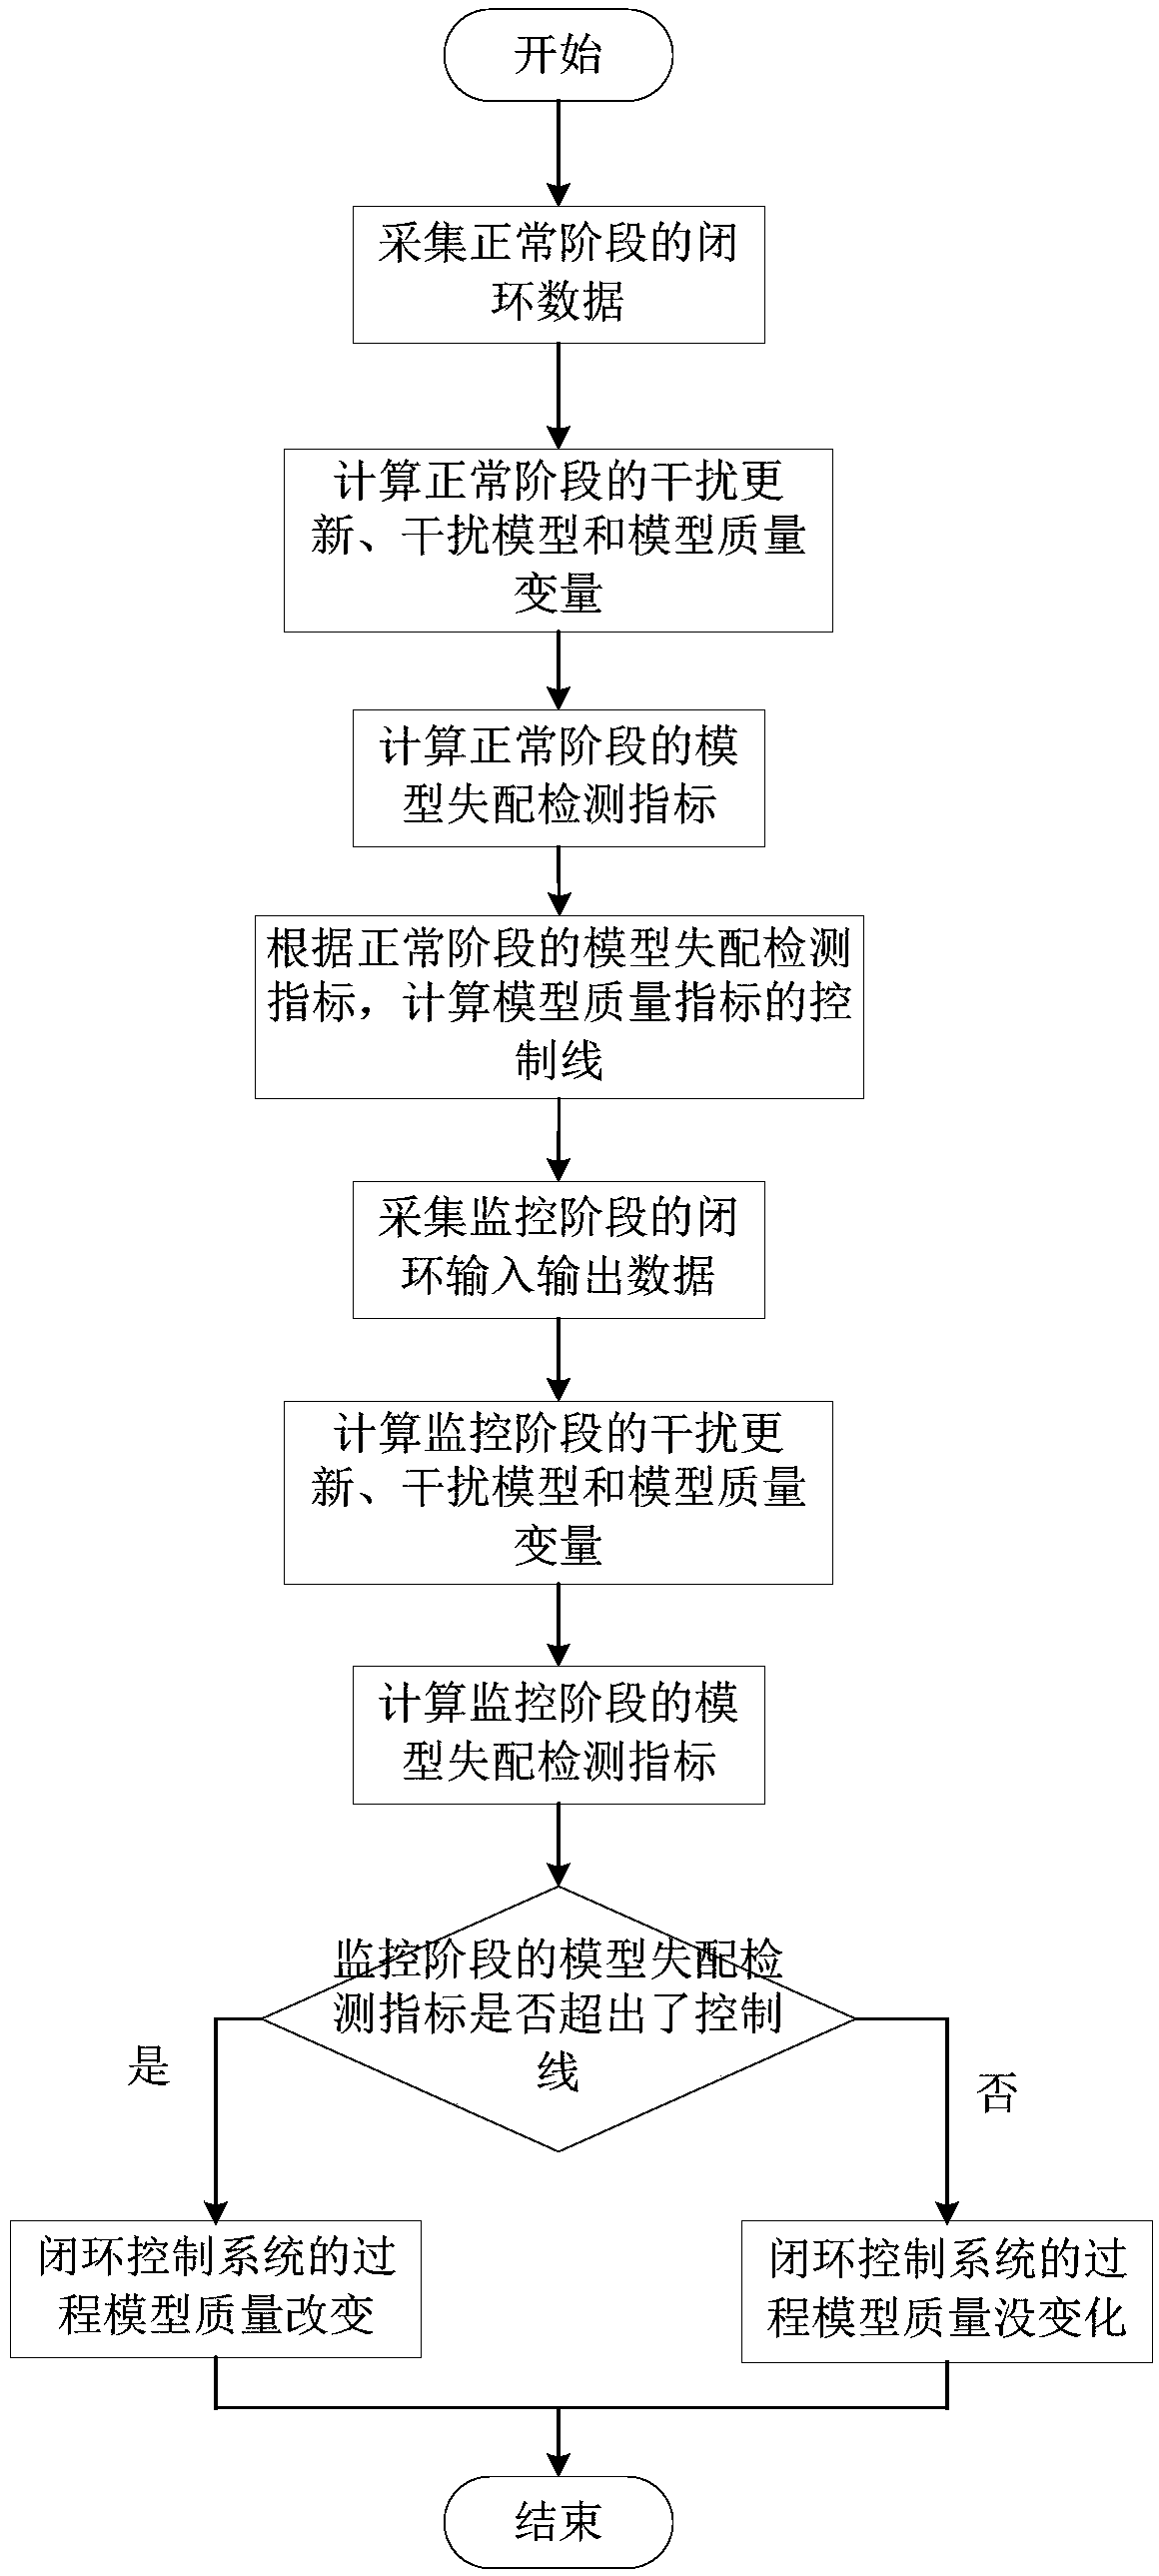 Method for model quality statistics of on-line monitoring closed-loop control system